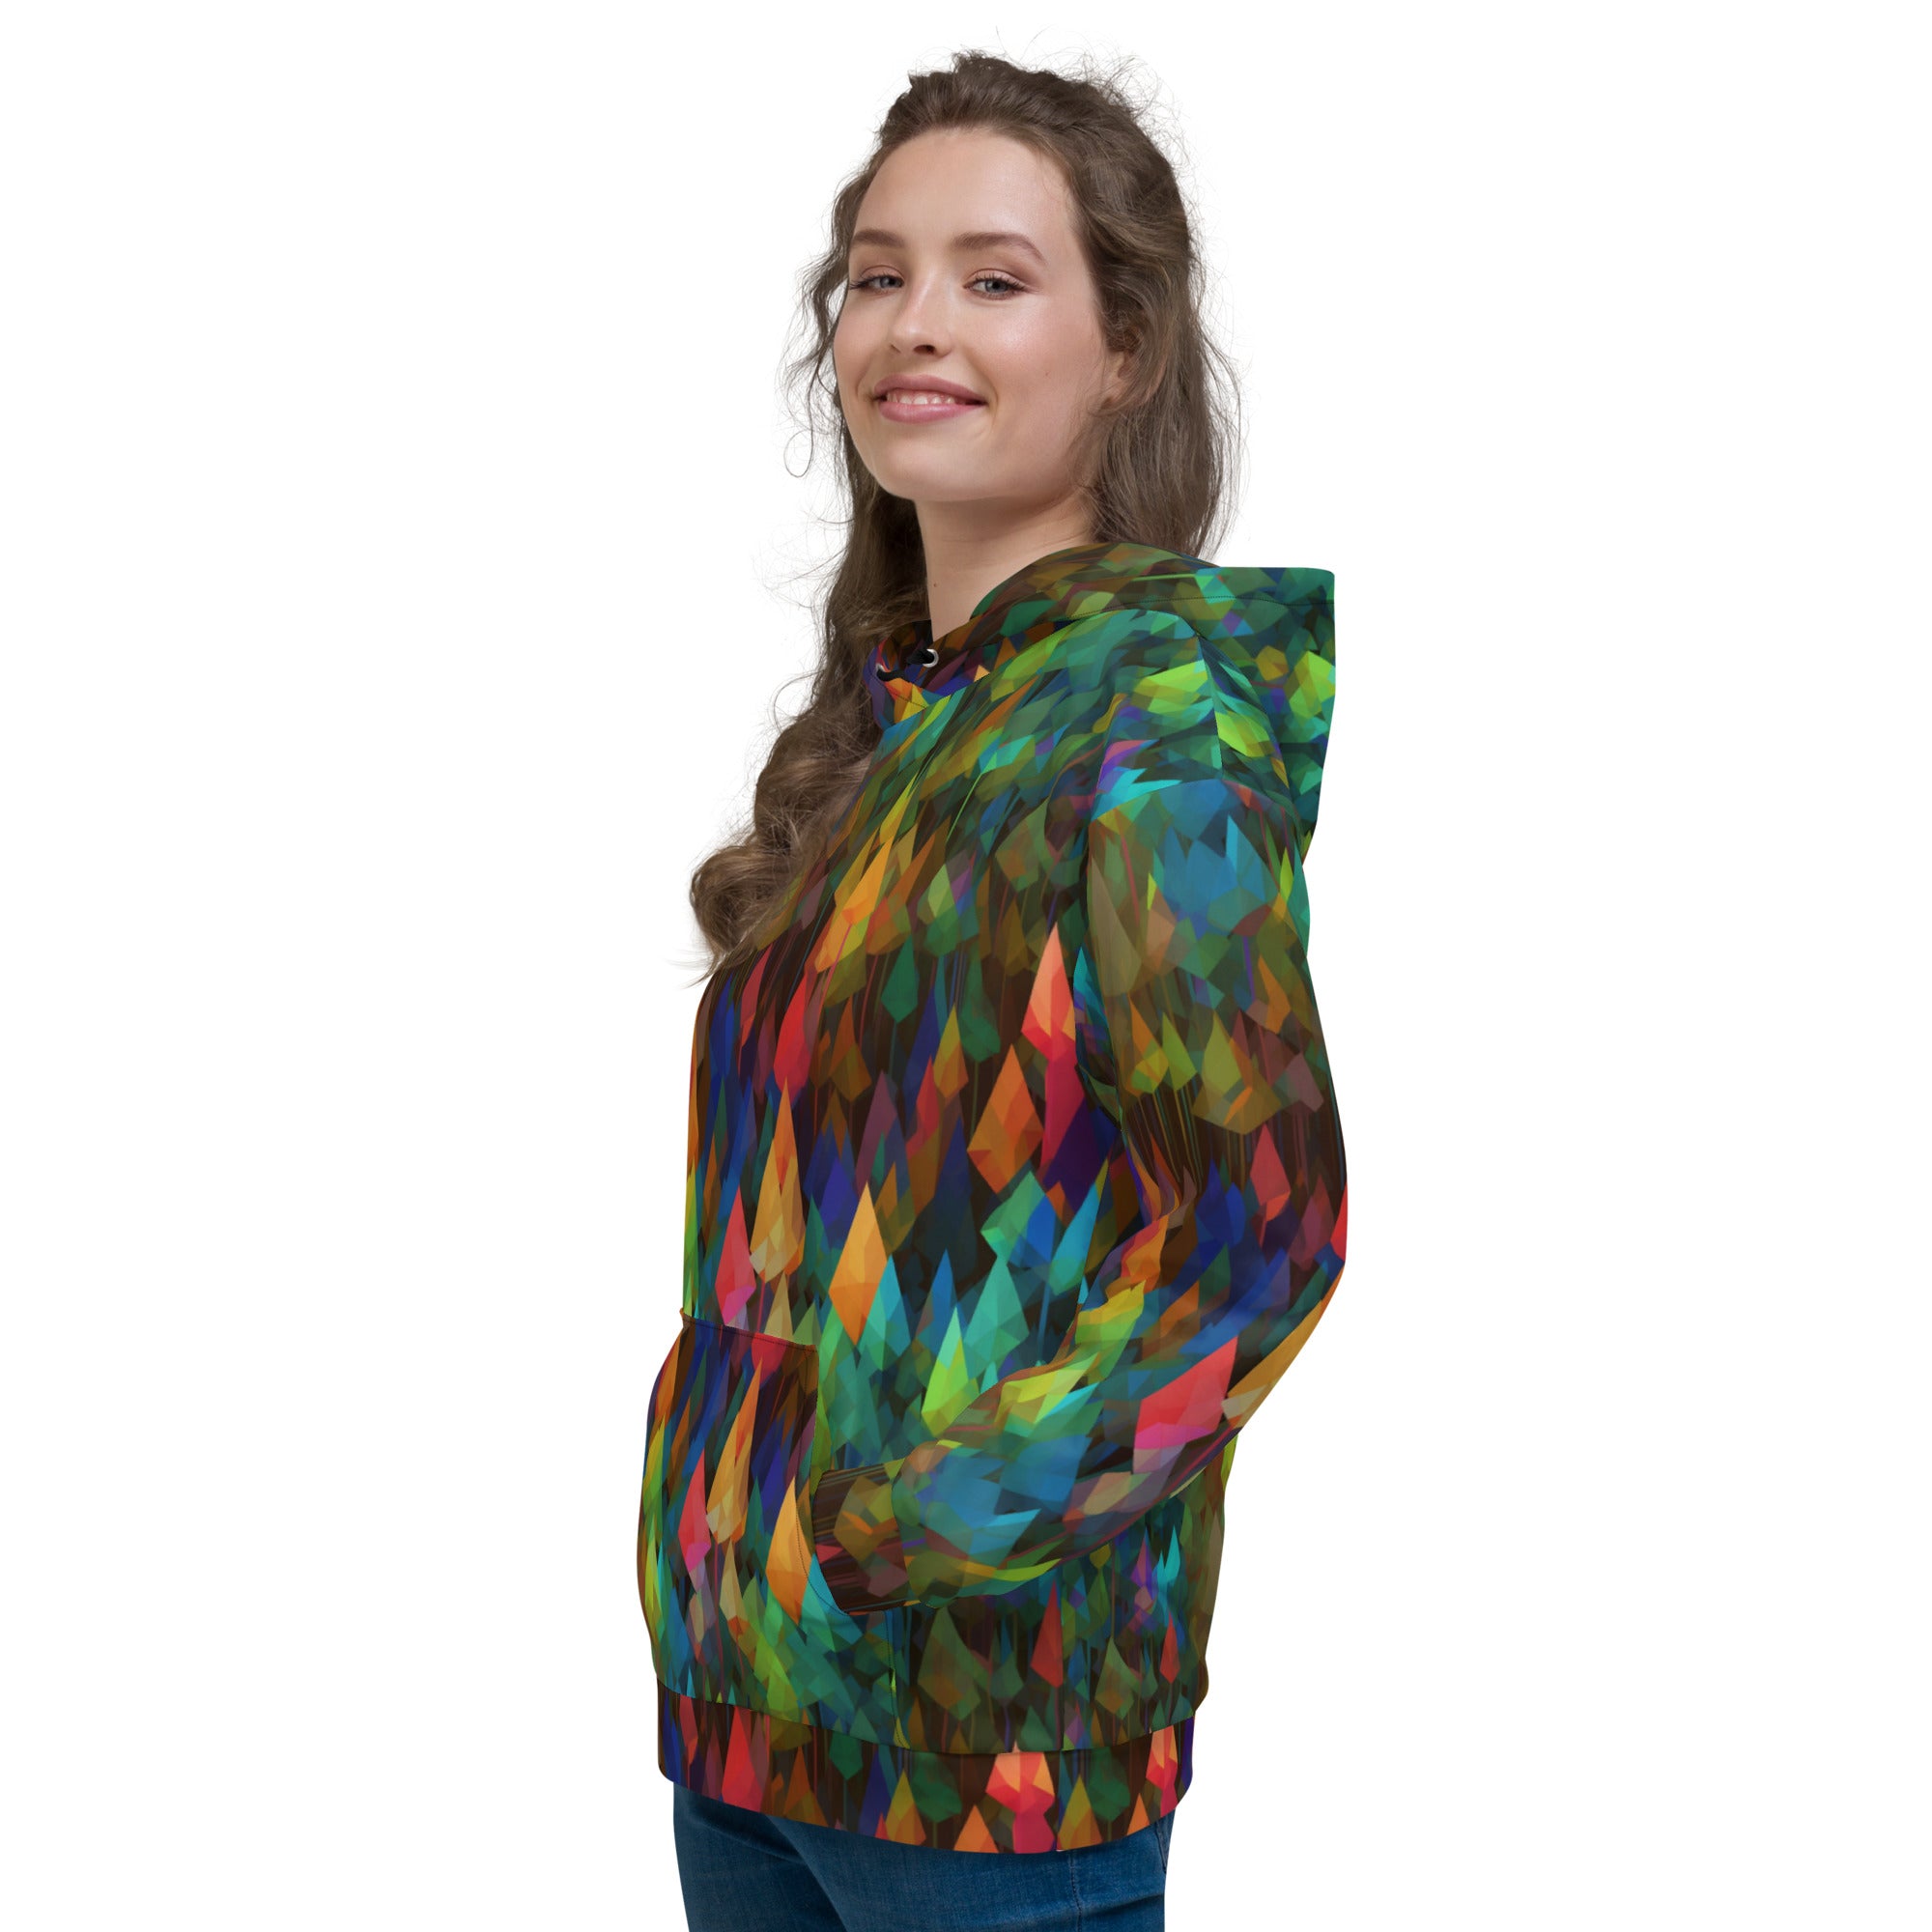 Unisex Hoodie- Abstract Rainbow Forest Pattern 08